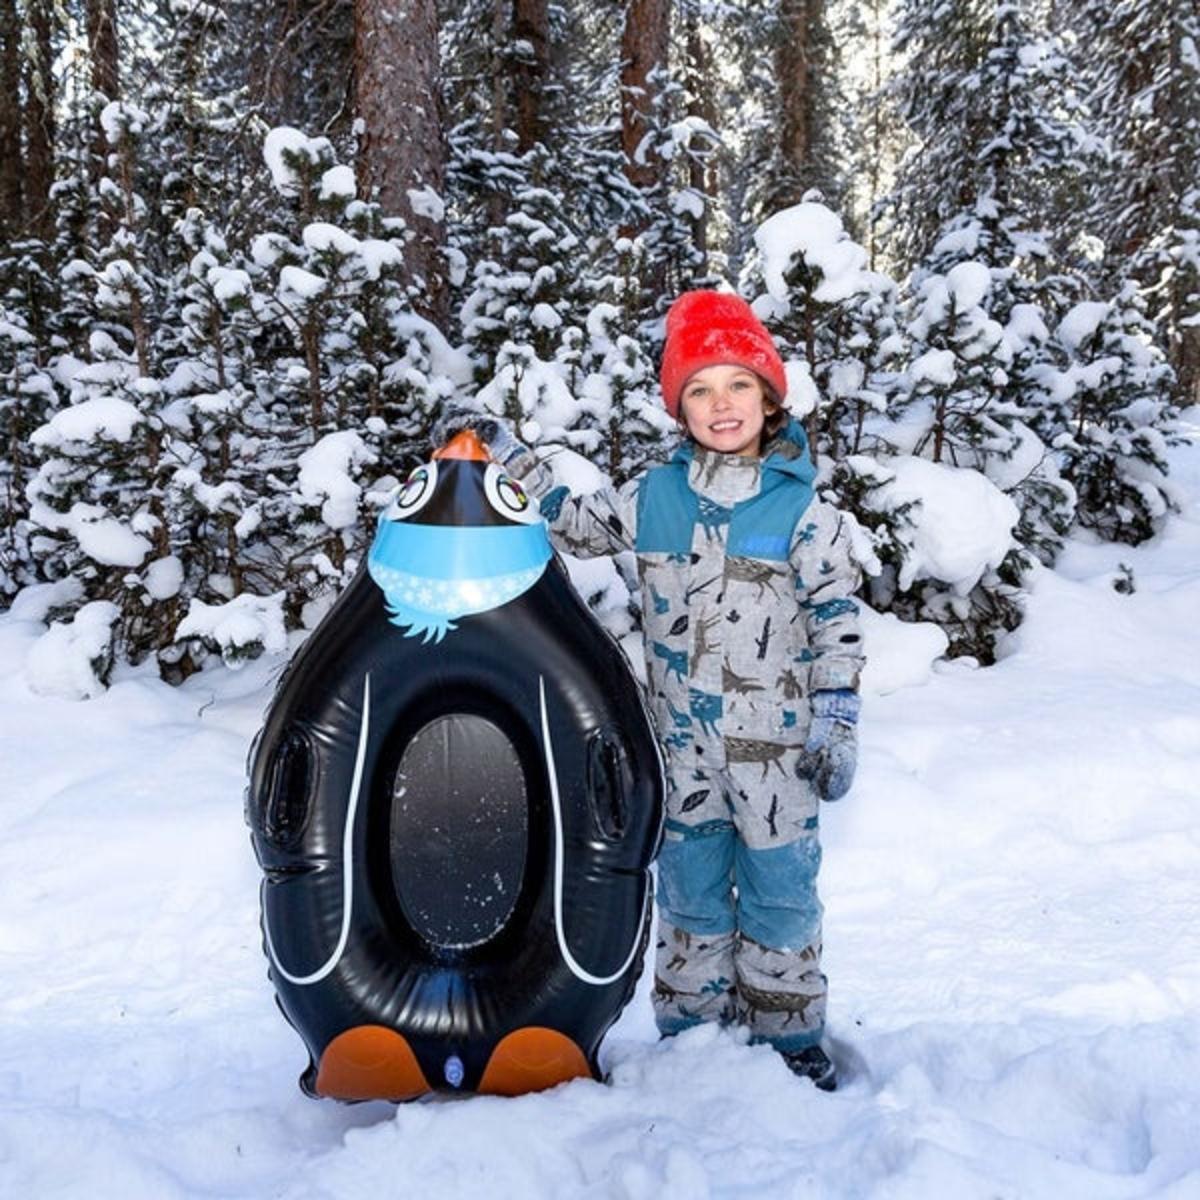 Inflatable Penguin Snow Sled SnowCandy